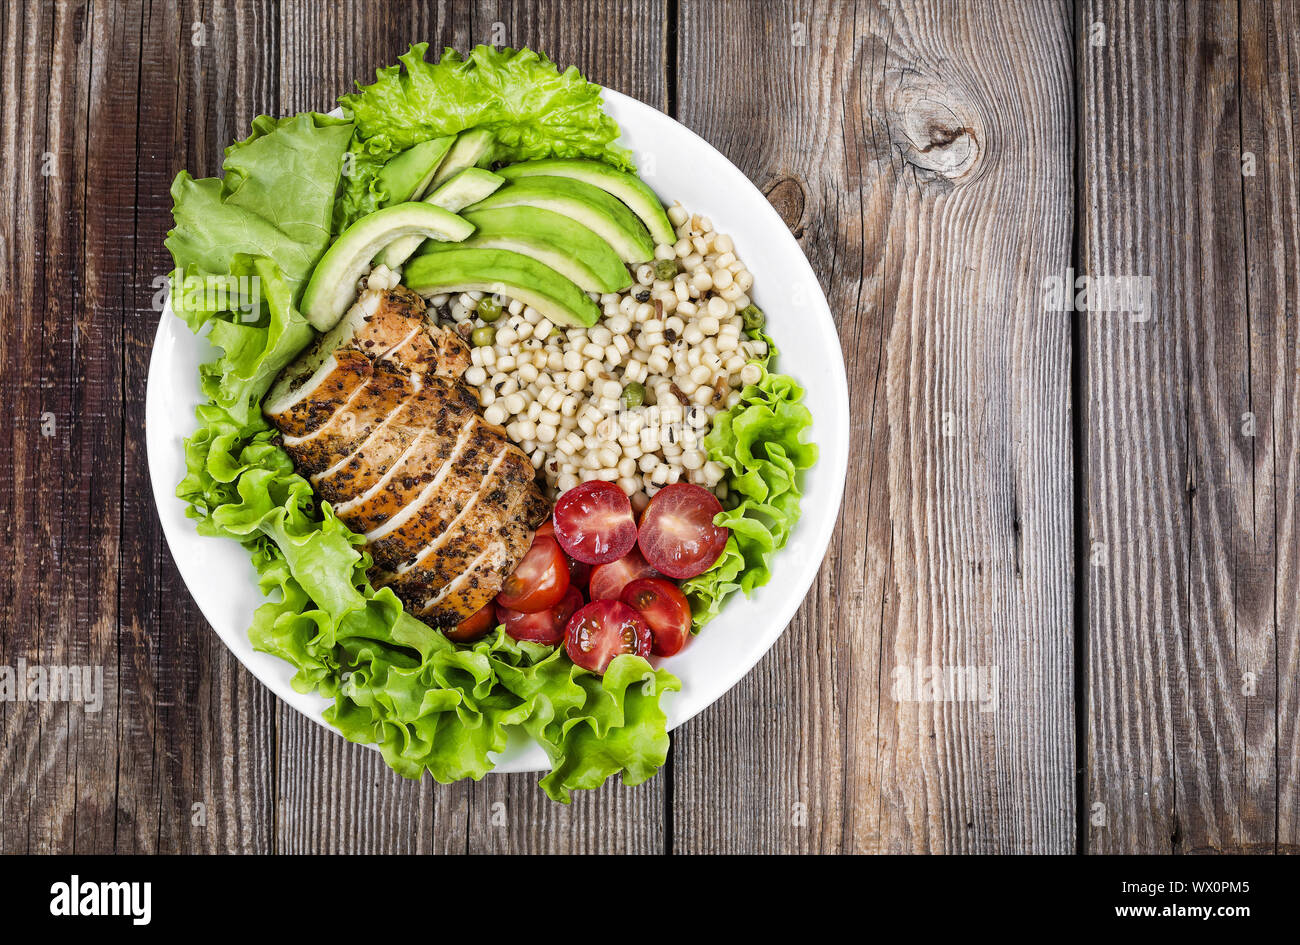 healthy food. grilled steak, avocado, cereal, healthy lifestyle, copy space, top view, rustic style. Stock Photo